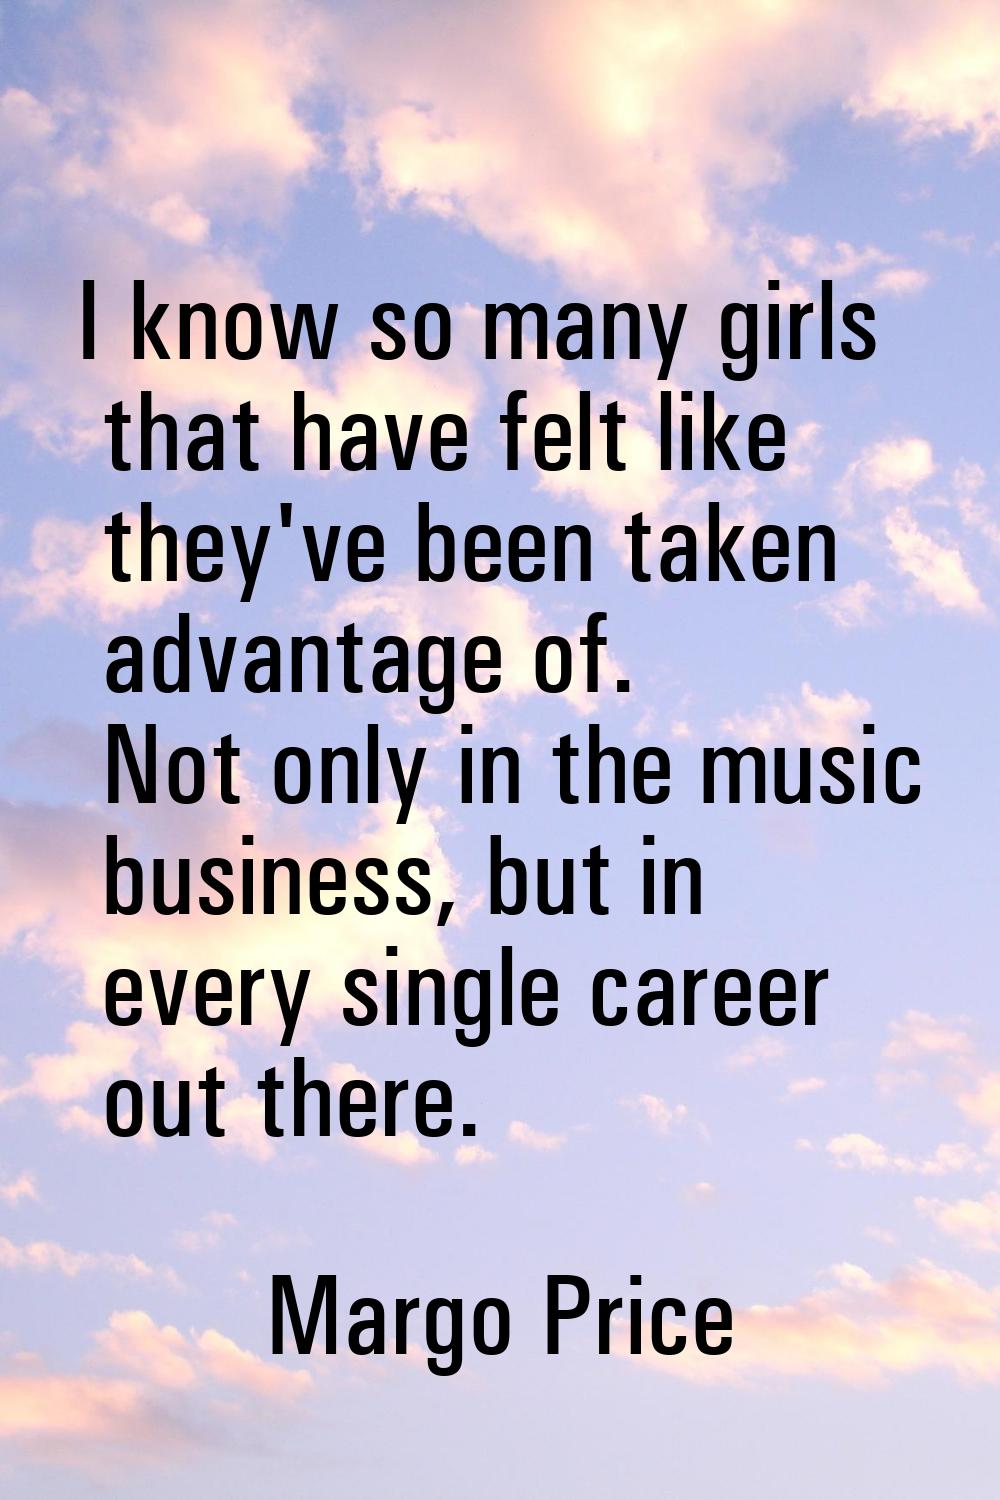 I know so many girls that have felt like they've been taken advantage of. Not only in the music bus